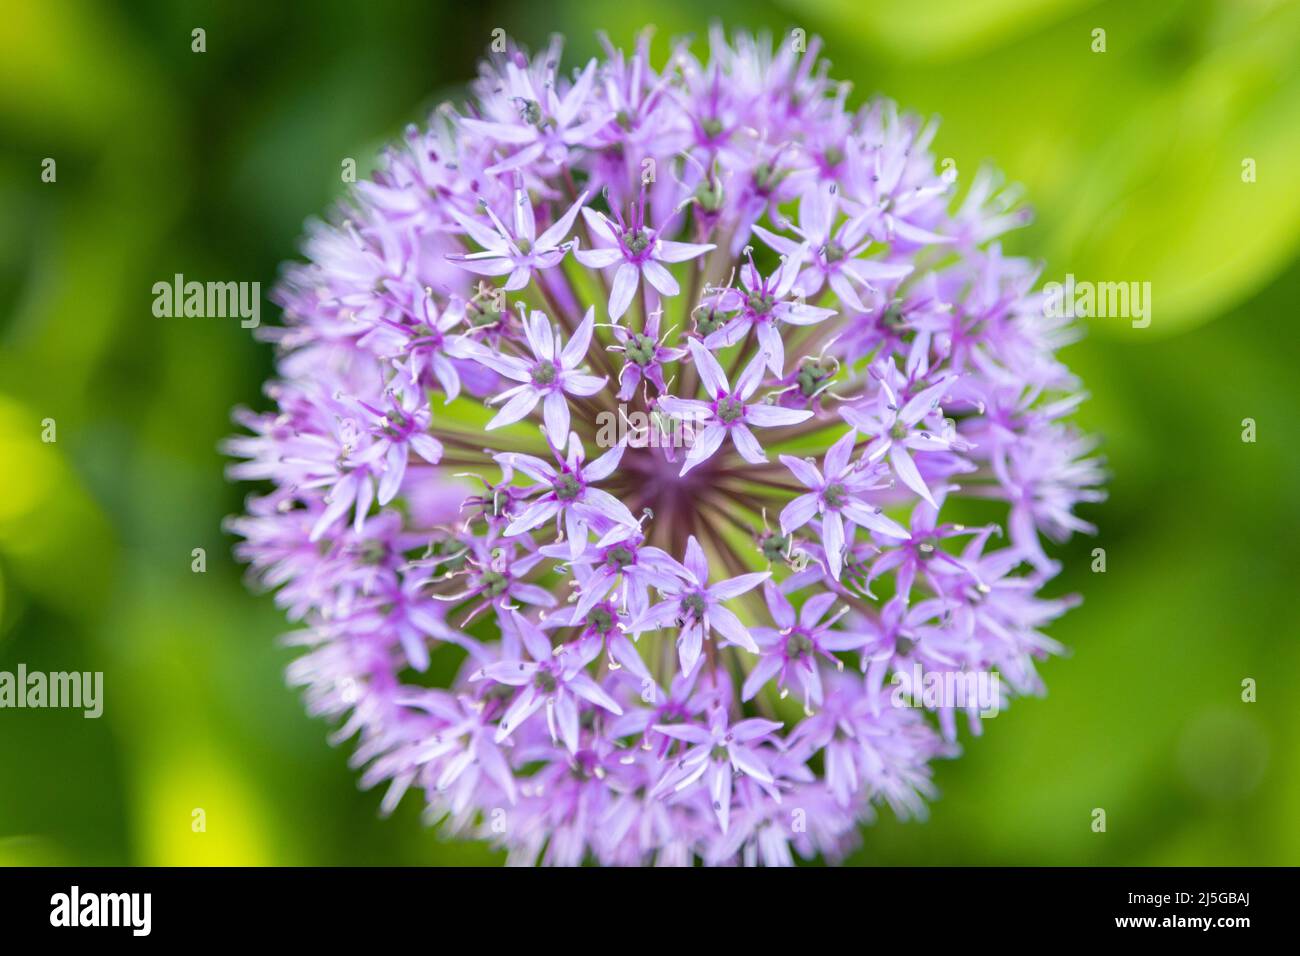 The wonderful purple flower of the ornamental lily Stock Photo